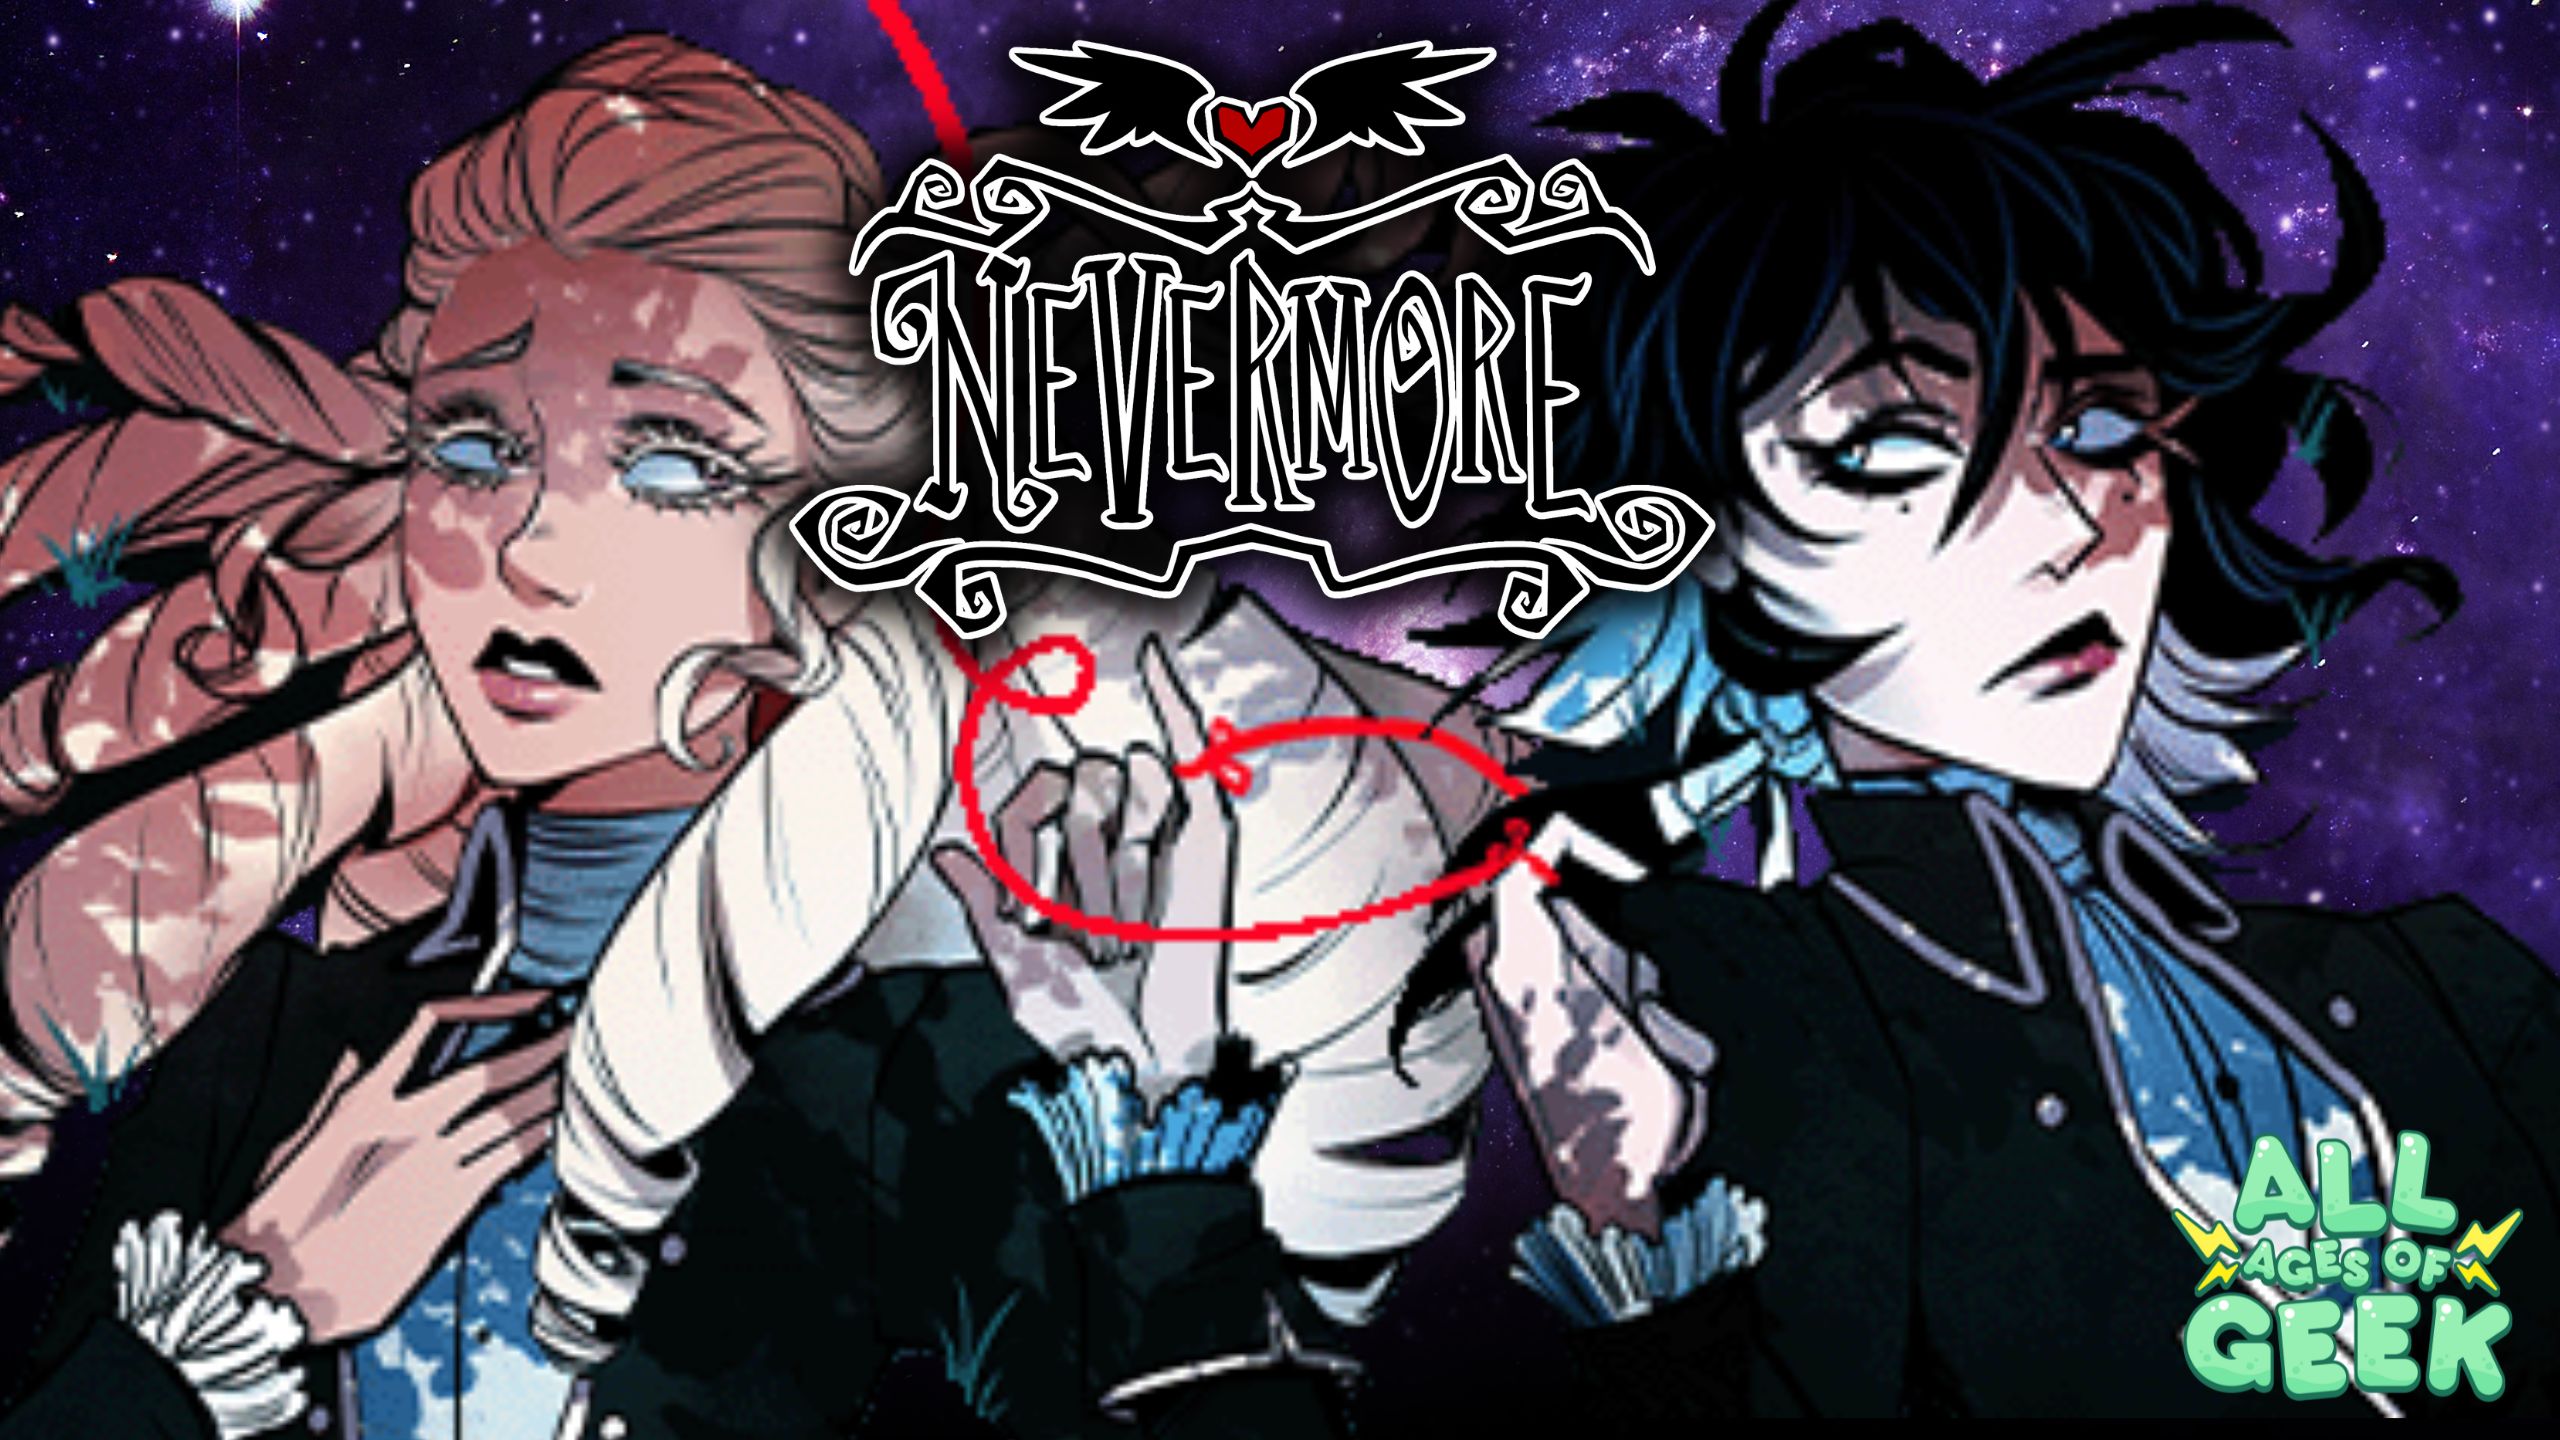 A Conversation with the Creators of Nevermore